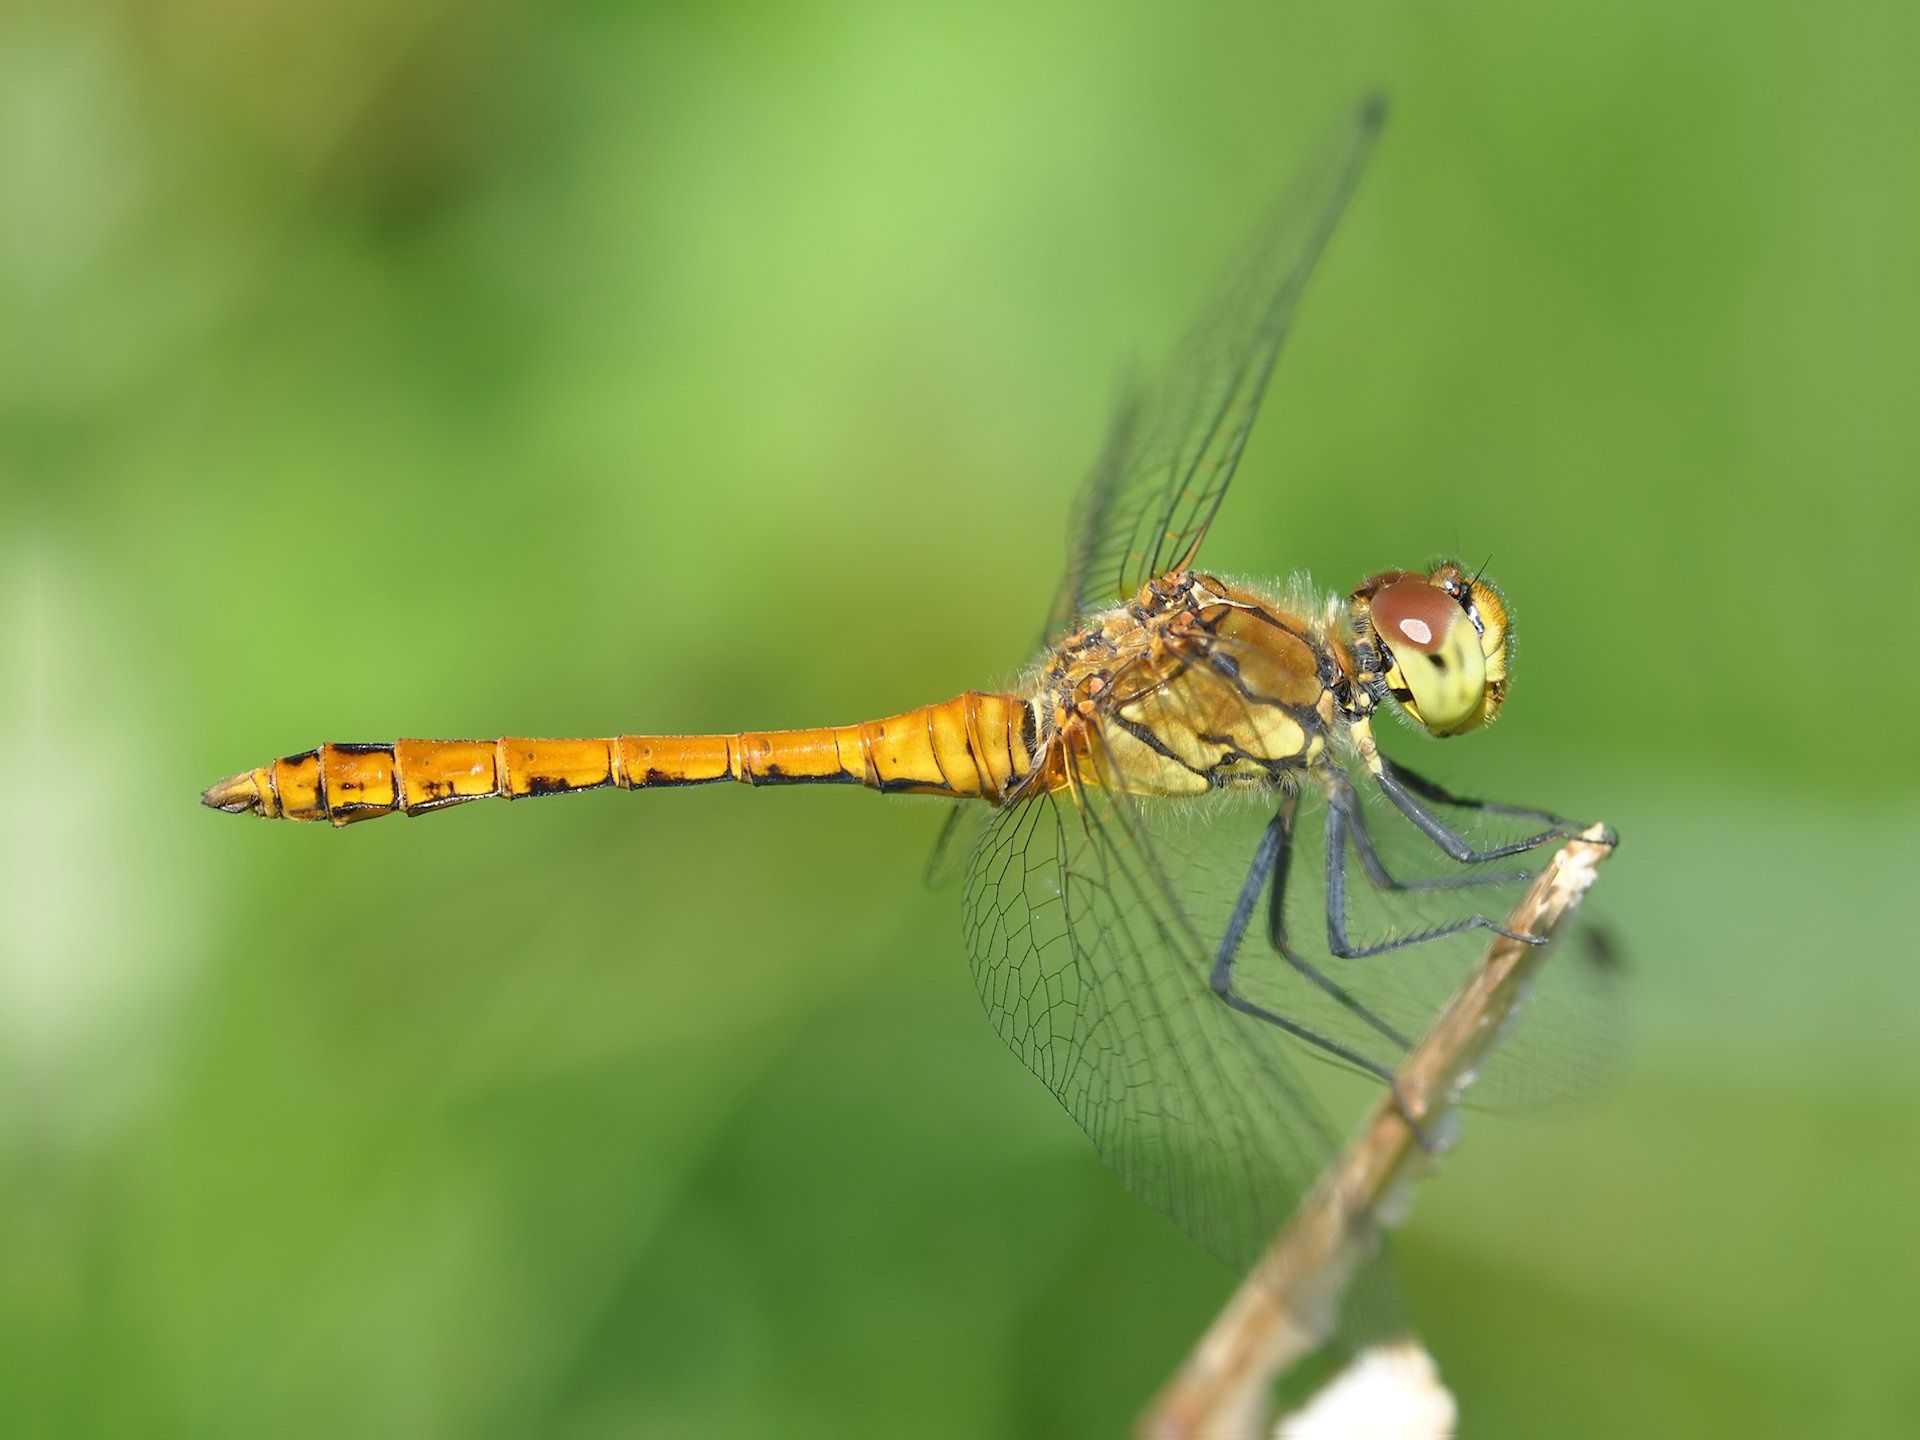 HD wallpaper, Dragonfly, Wallpapers